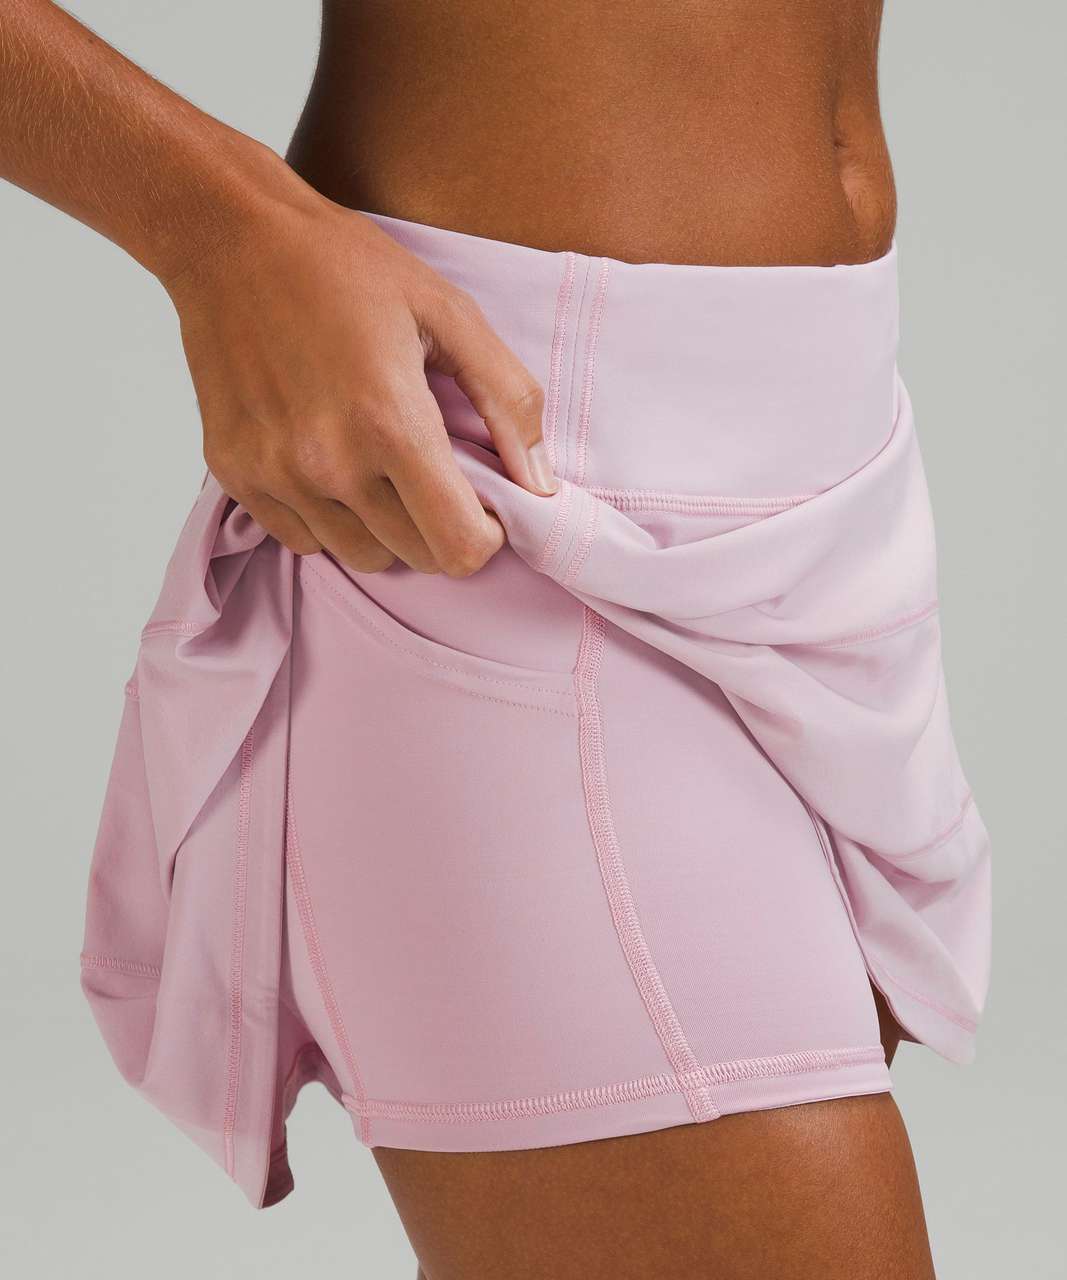 Lululemon Pace Rival Mid-Rise Skirt *Long - Pink Peony